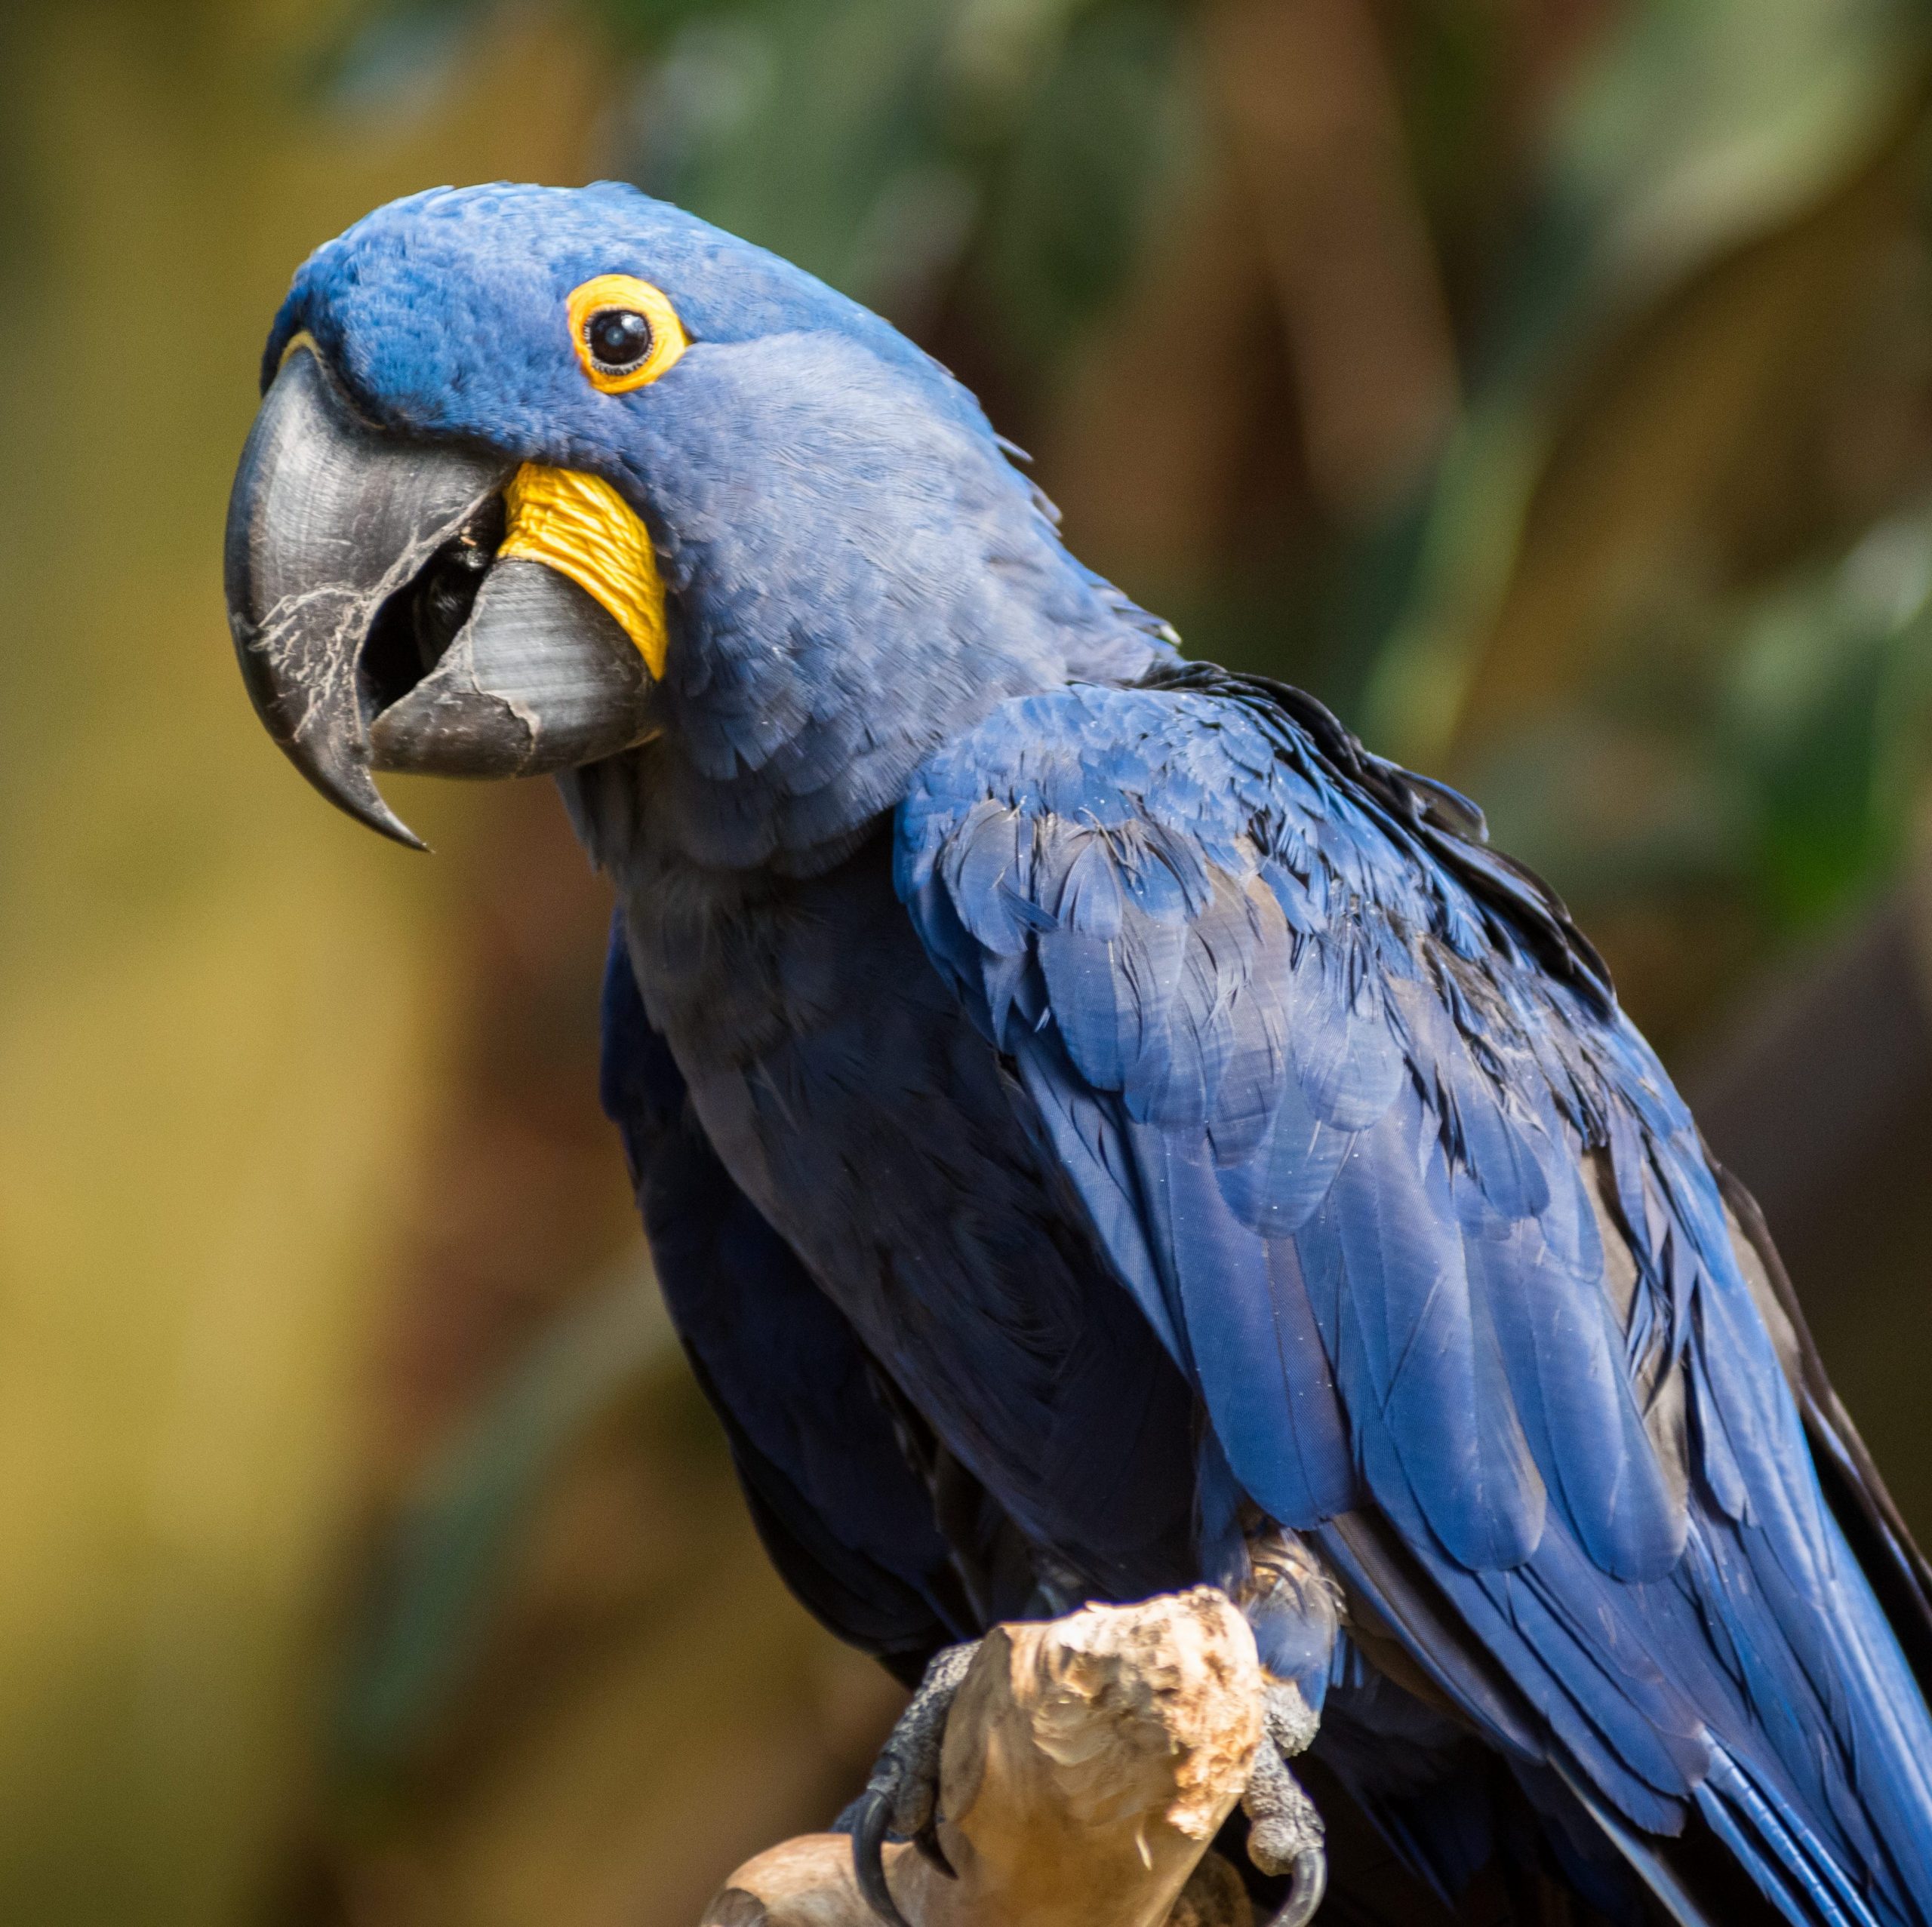 Hyacinth Macaw perched on a branch